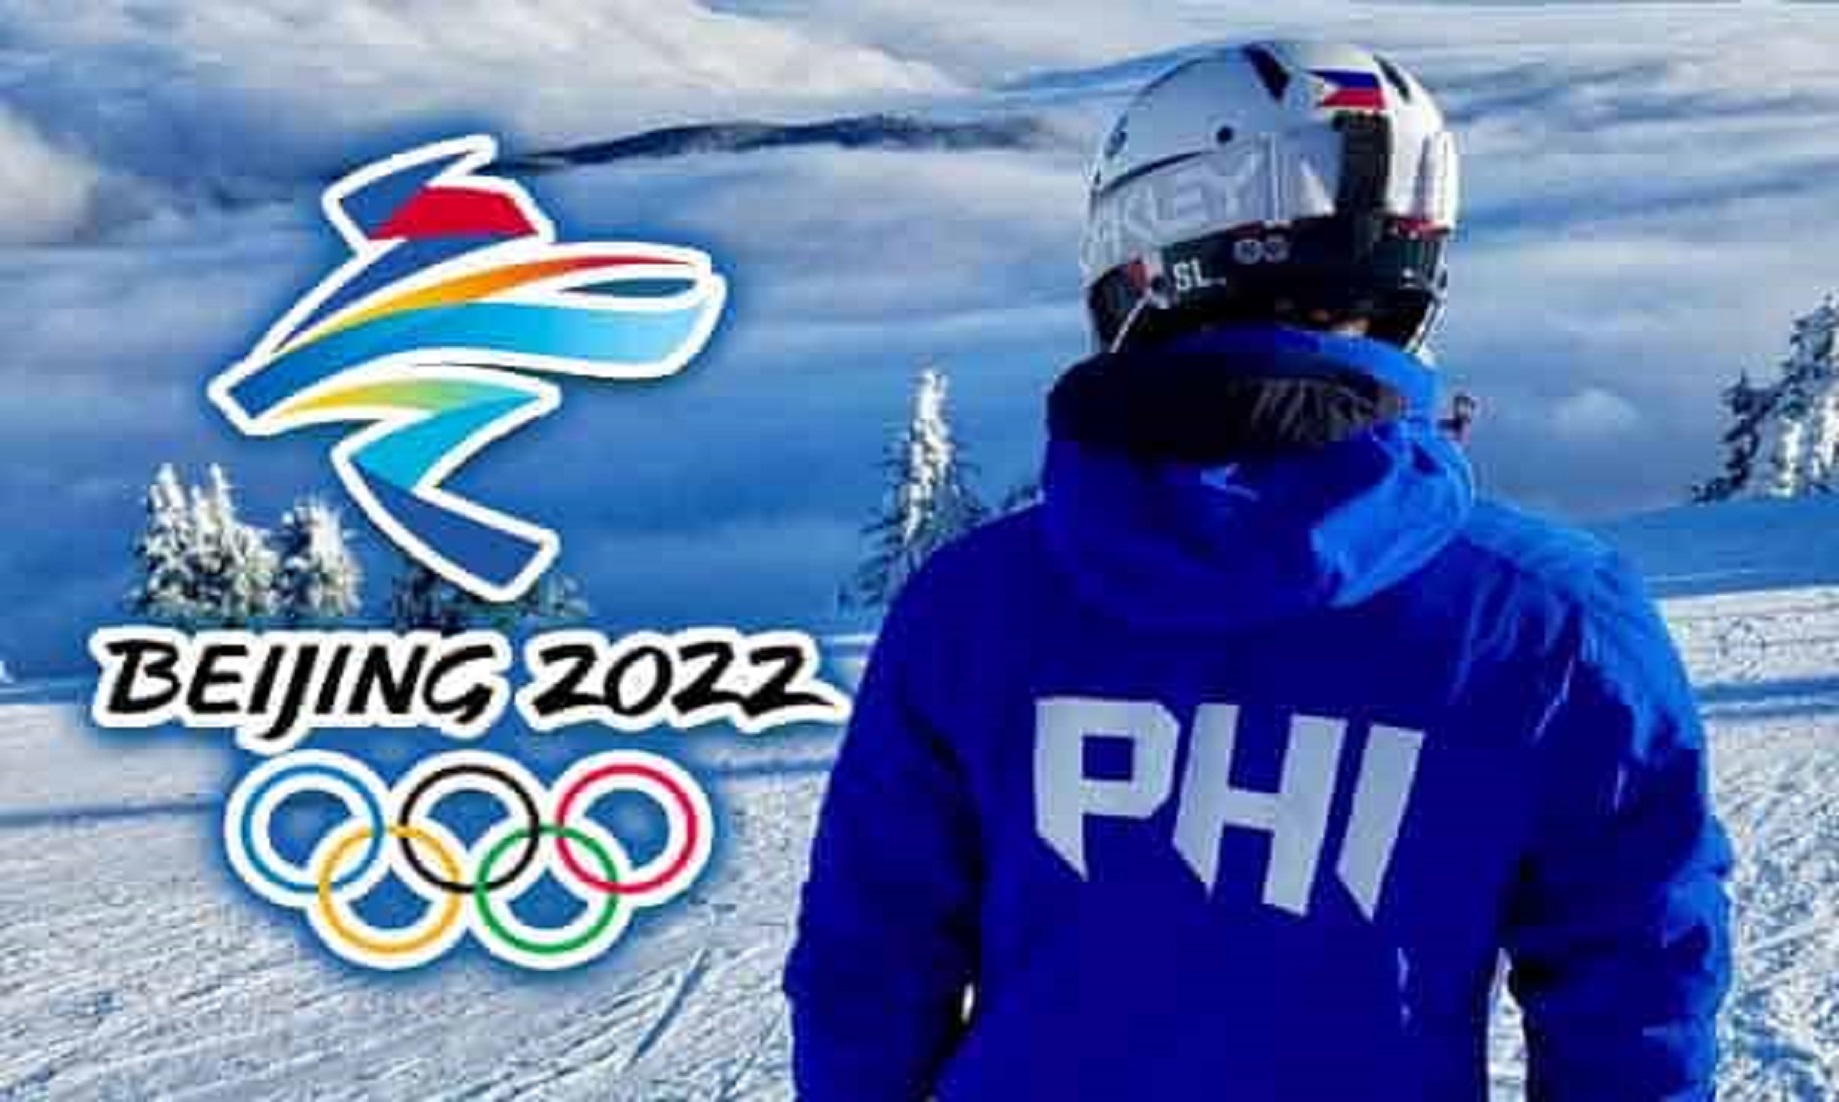 Philippines Hopes To Inspire Youth To Winter Sports Via Beijing 2022